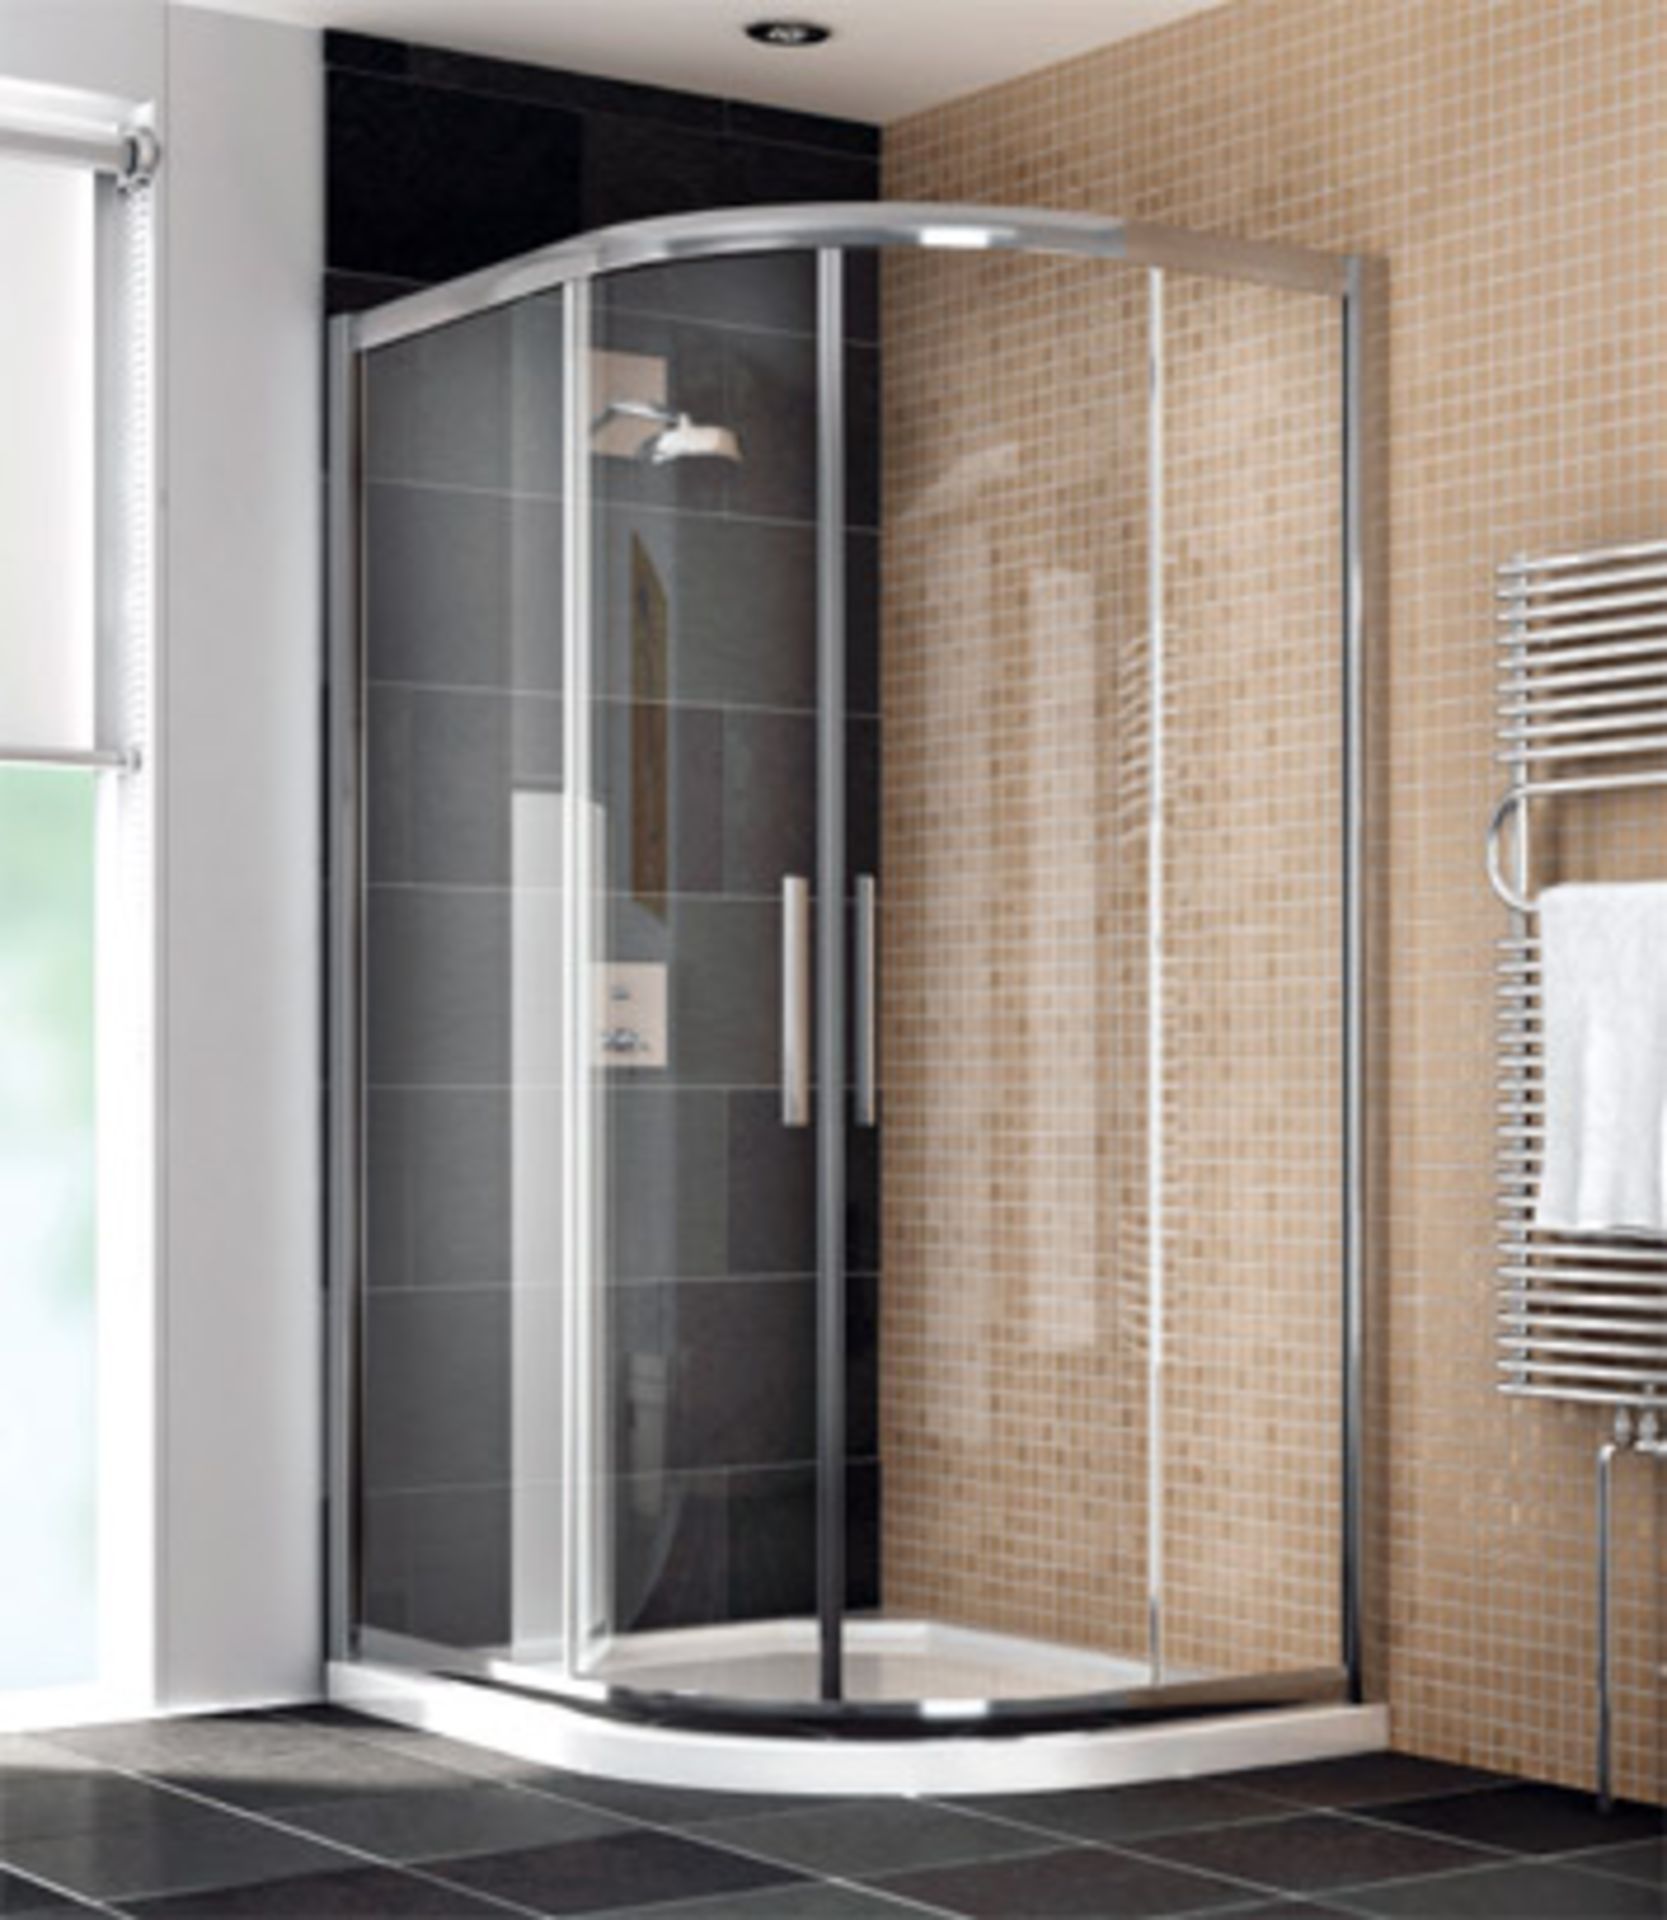 Manhattan glass Quad shower enclosure (no Tray), 1200x800m, unused and boxed, comes in 2 boxes which